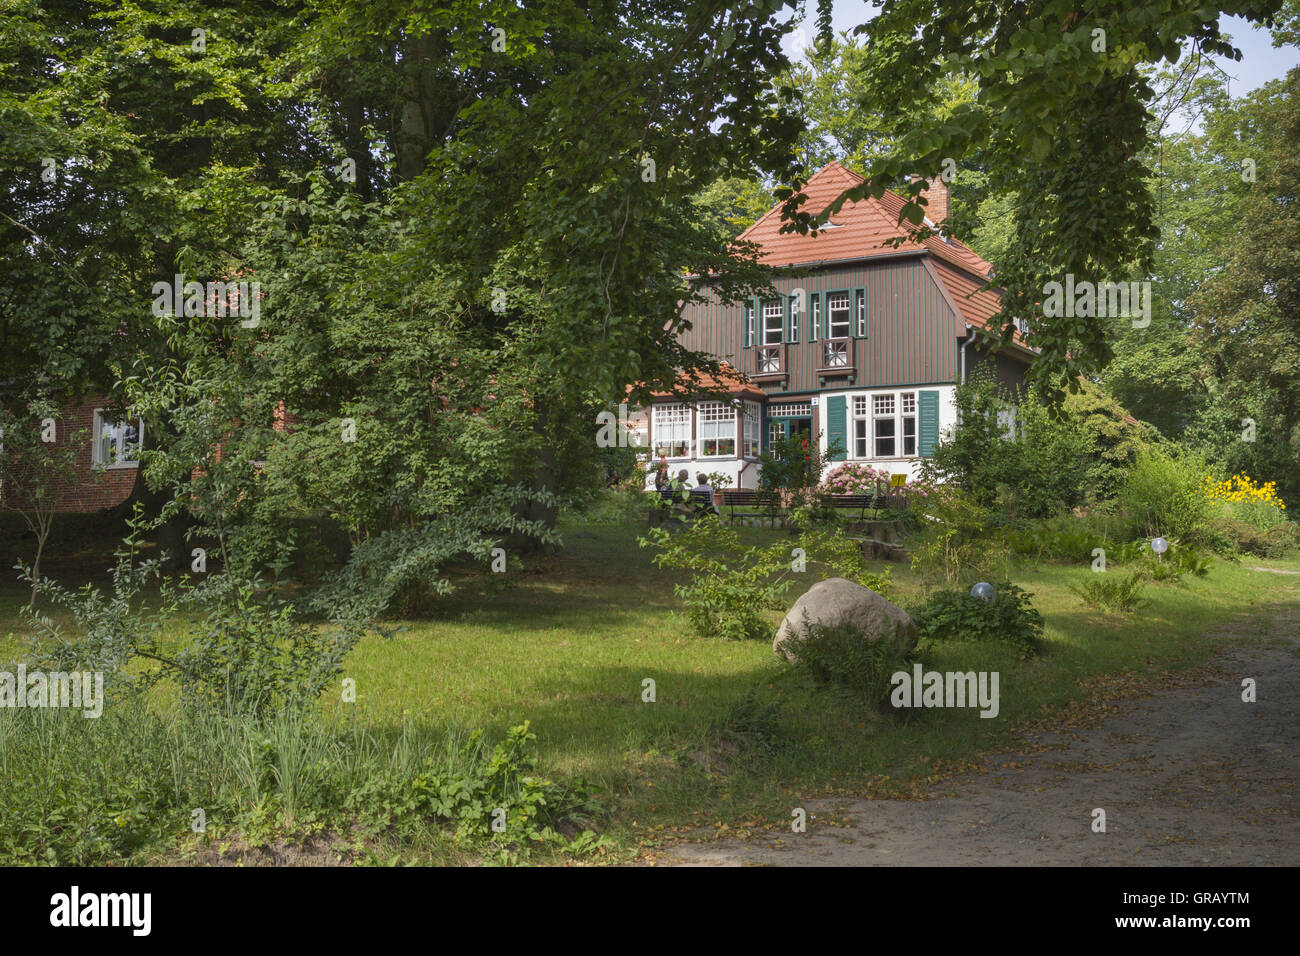 View From The Main Street In Kloster, Hiddensee, The Gerhart Hauptmann House Stock Photo